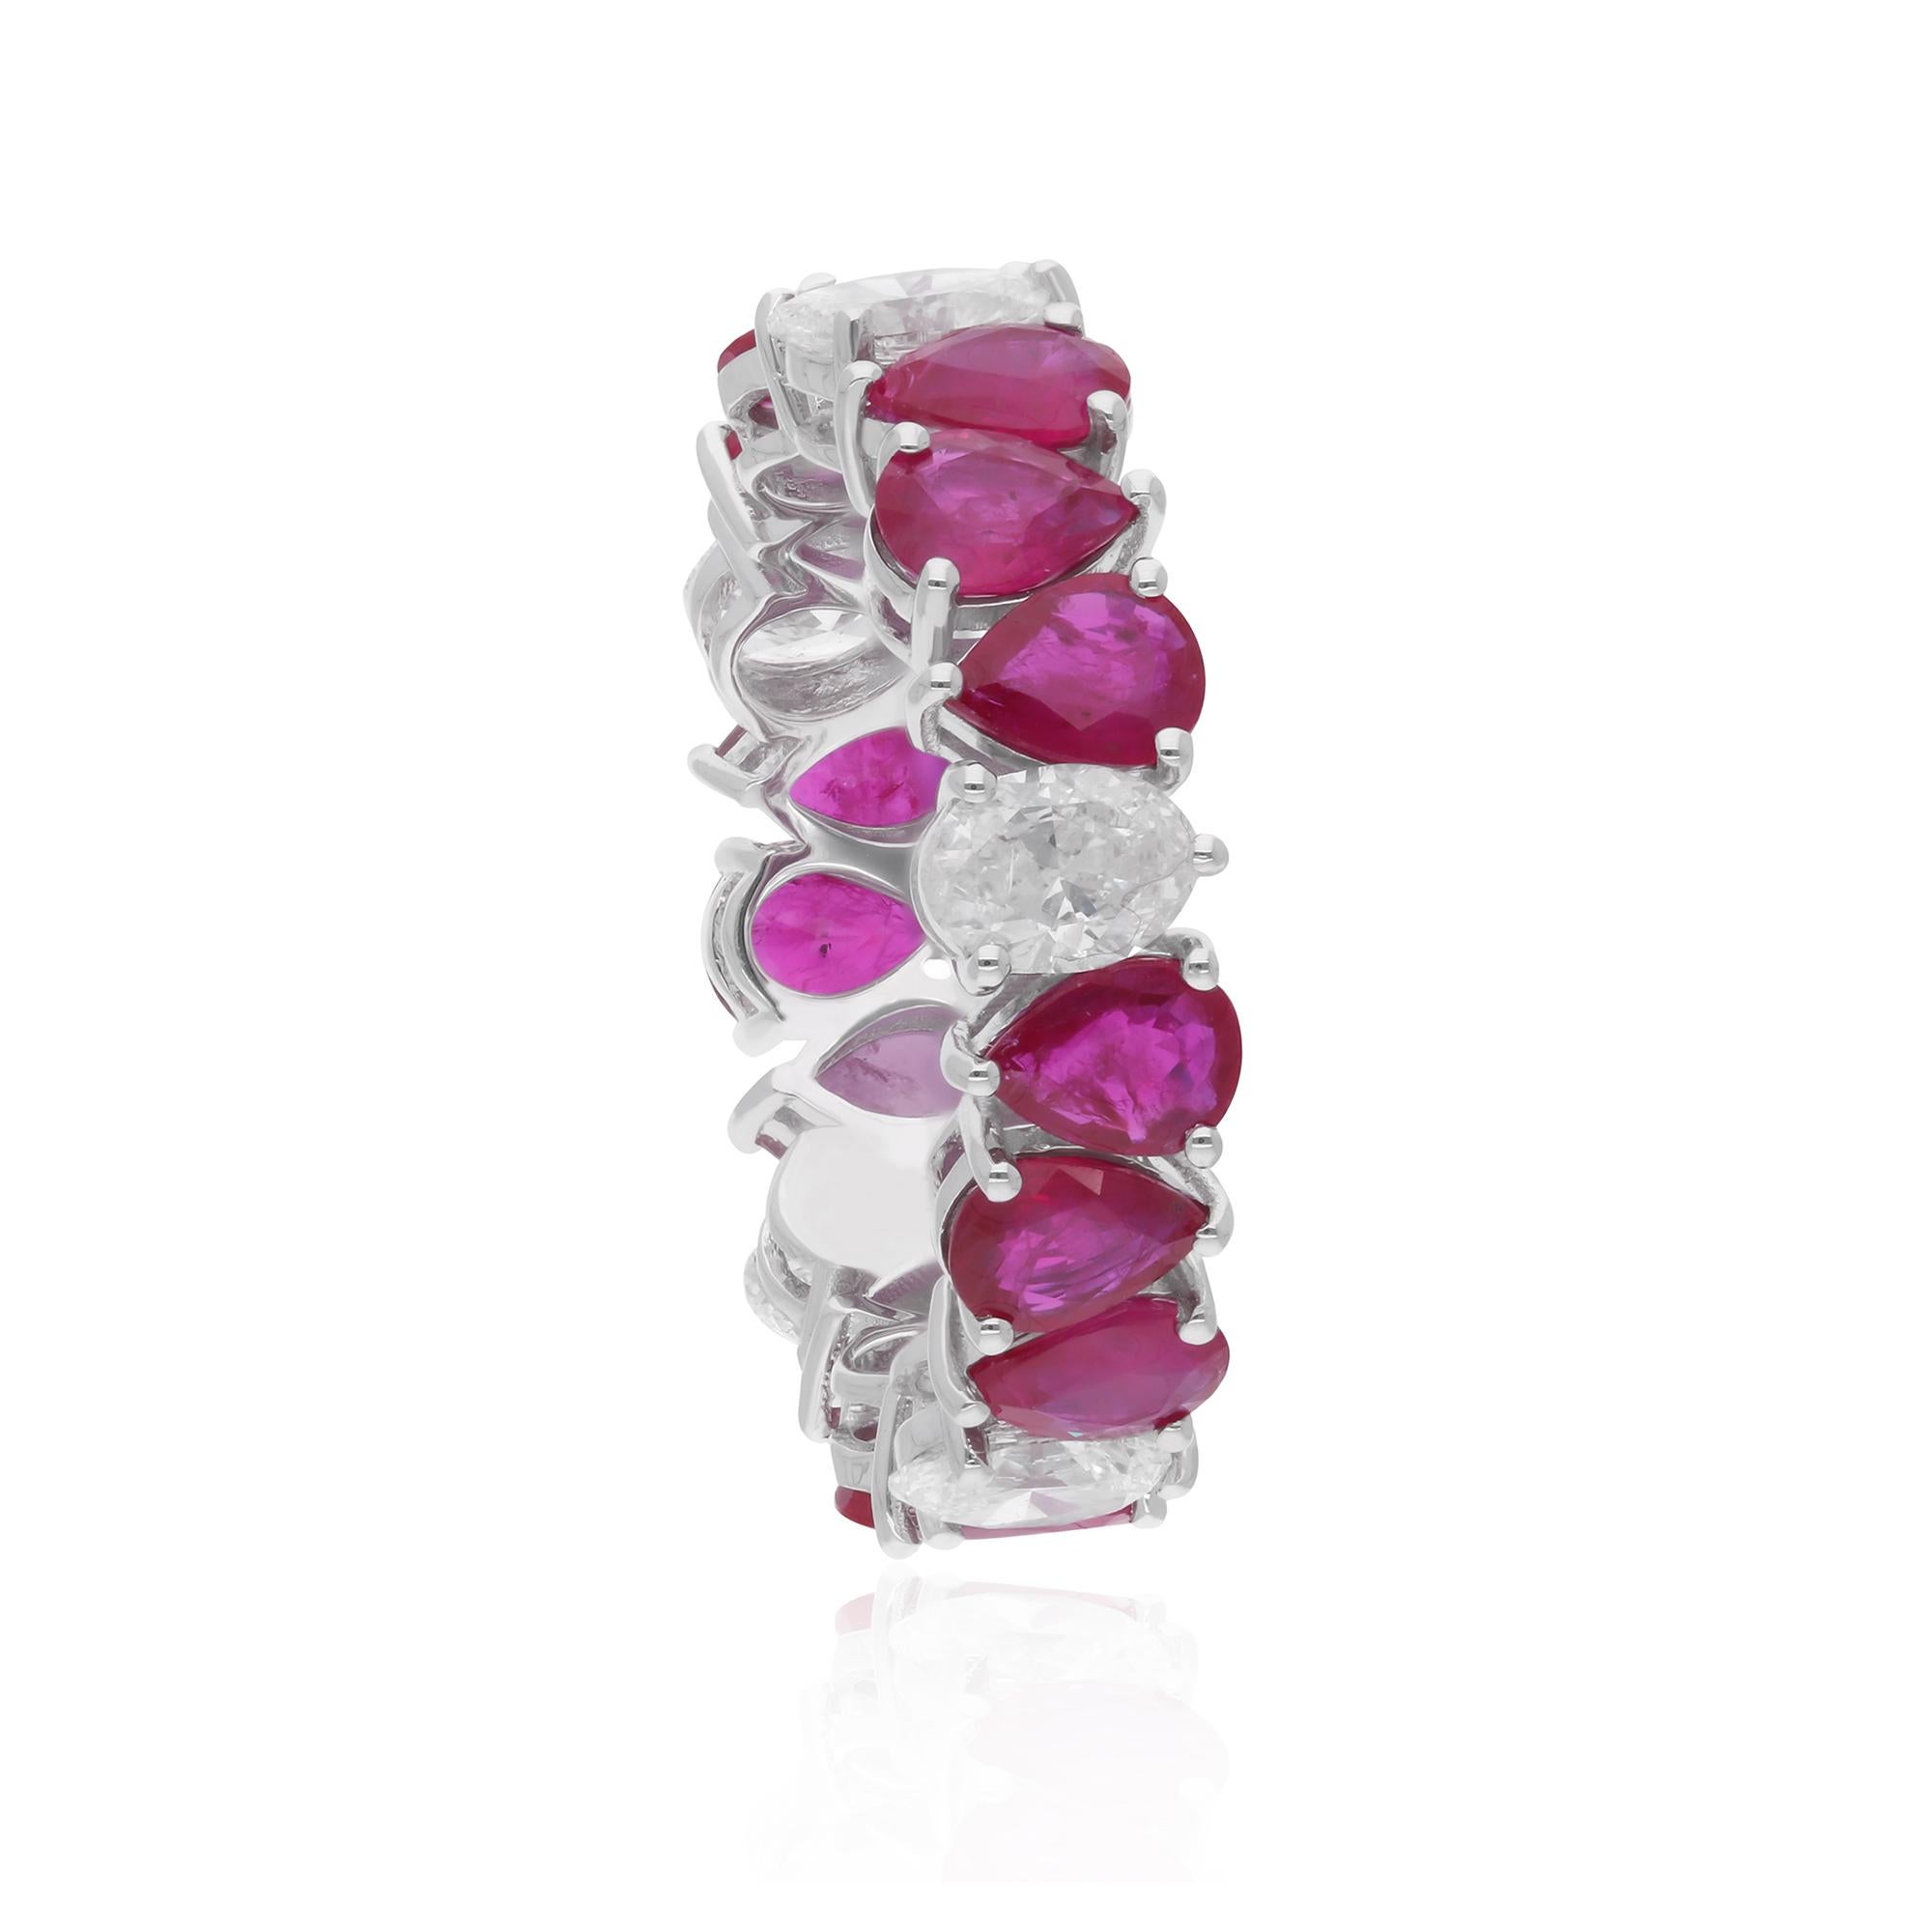 Immerse yourself in the allure of timeless beauty with this exquisite Pear Ruby Gemstone Band Ring, adorned with an Oval Diamond and expertly crafted in 14 karat White Gold. Handmade with meticulous attention to detail, this ring is a true